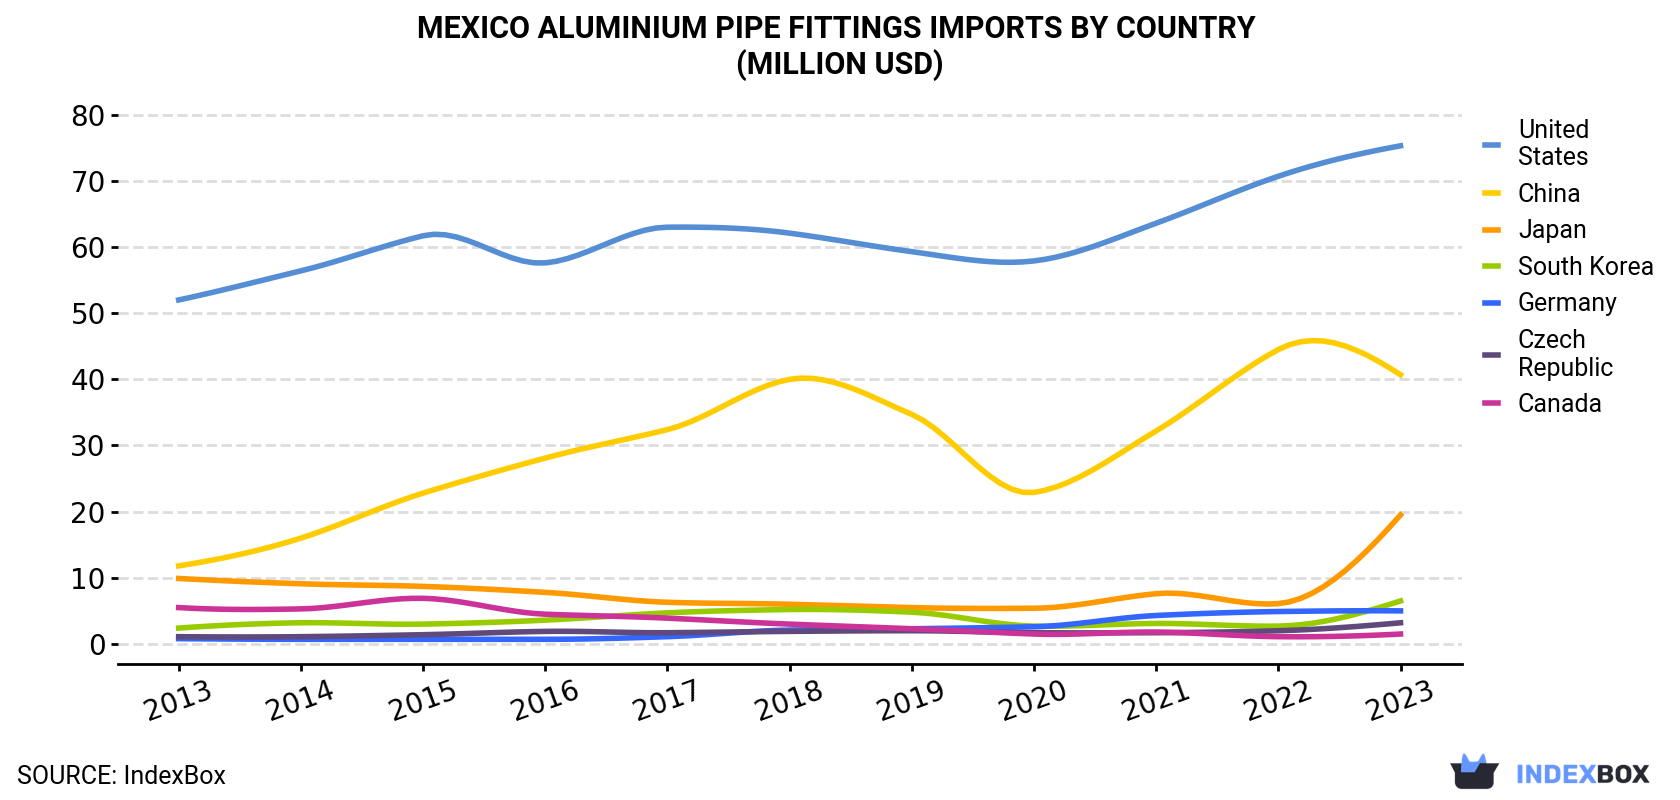 Mexico Aluminium Pipe Fittings Imports By Country (Million USD)